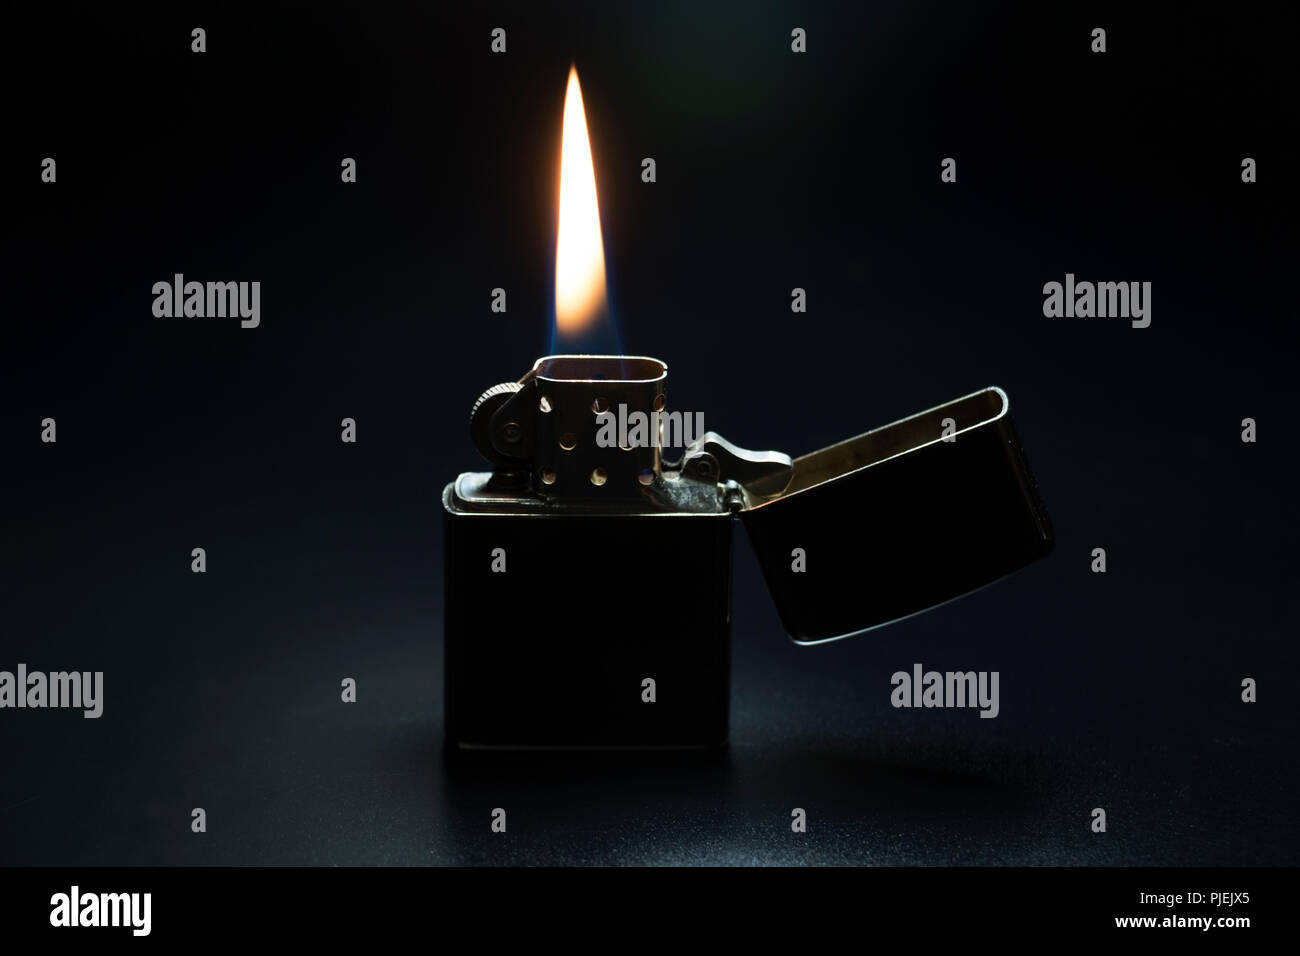 Lighter burning in darkness. Metallic lighter with red hot flame isolated on black background. Stock Photo